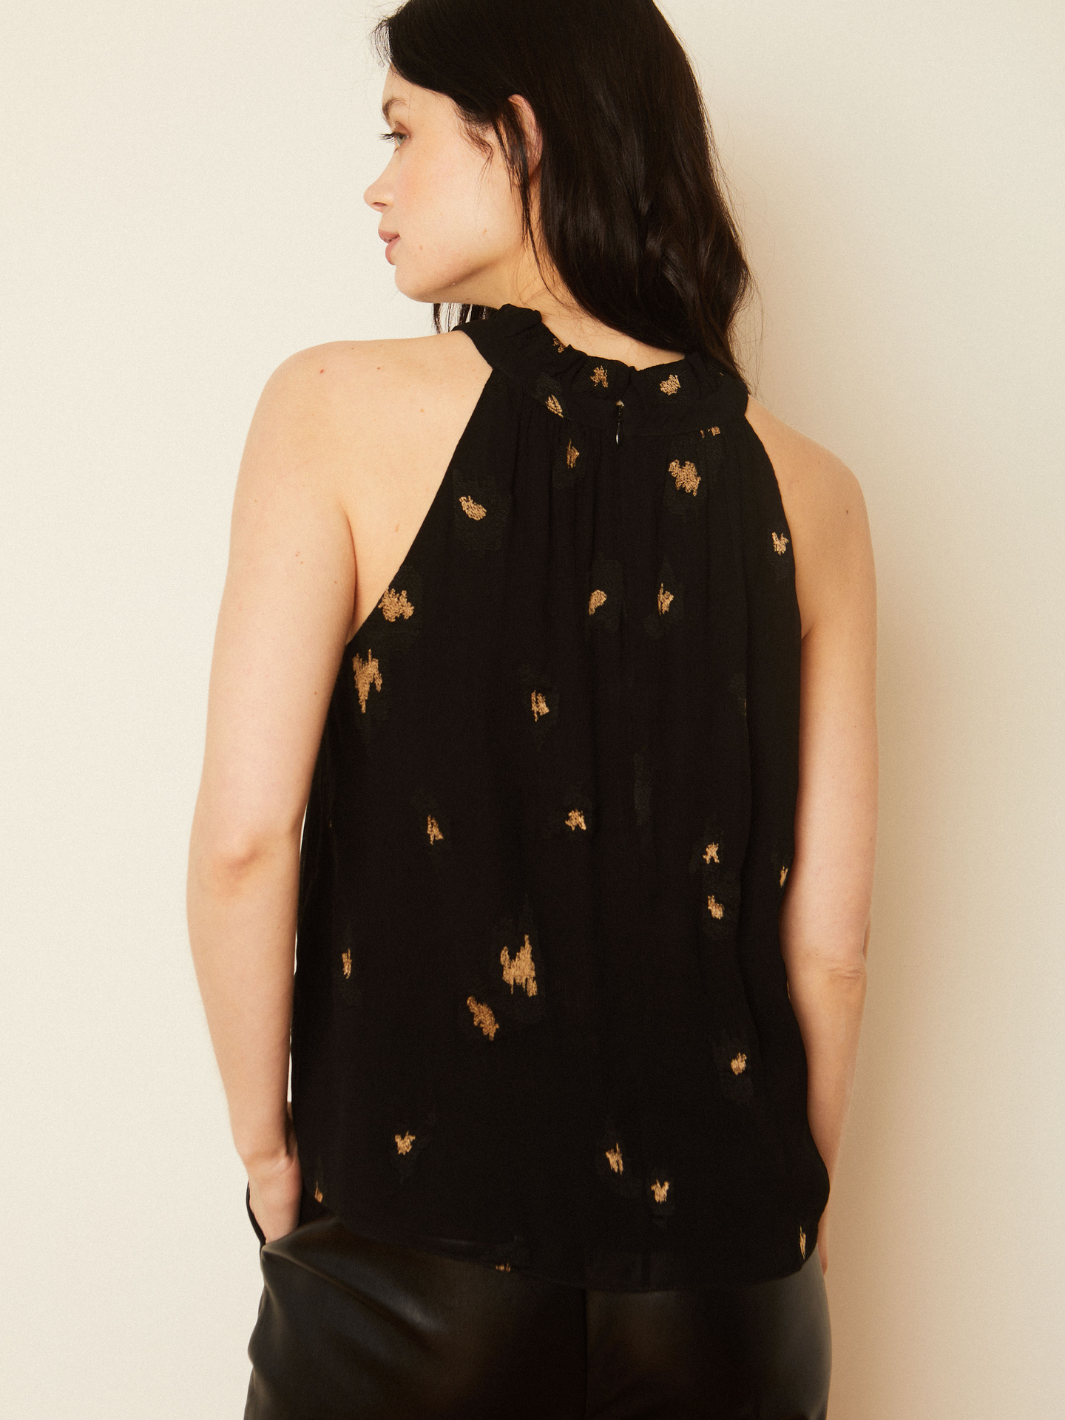 HOLLIE JACQUARD TOP IN STARRY NIGHT - Romi Boutique